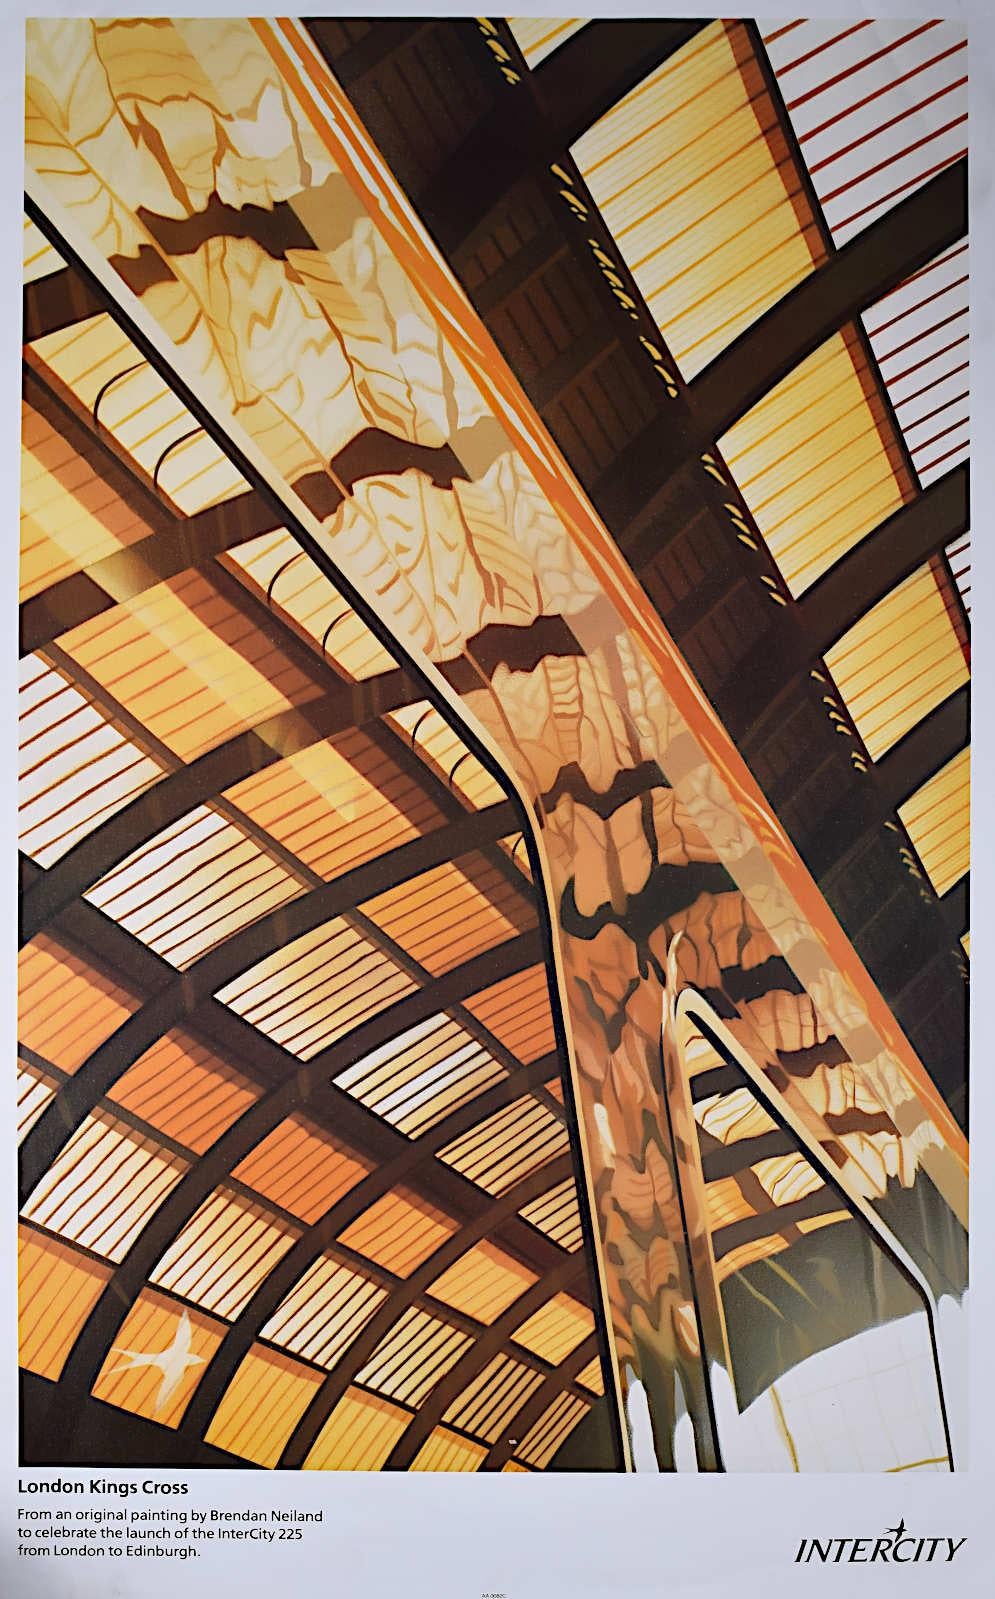 To see our other vintage posters, scroll down to "More from this Seller" and below it click on "See all from this Seller" - or send us a message if you cannot find the view you want.

Brendan Neiland (b. 1941)
York Railway Station
Original Vintage